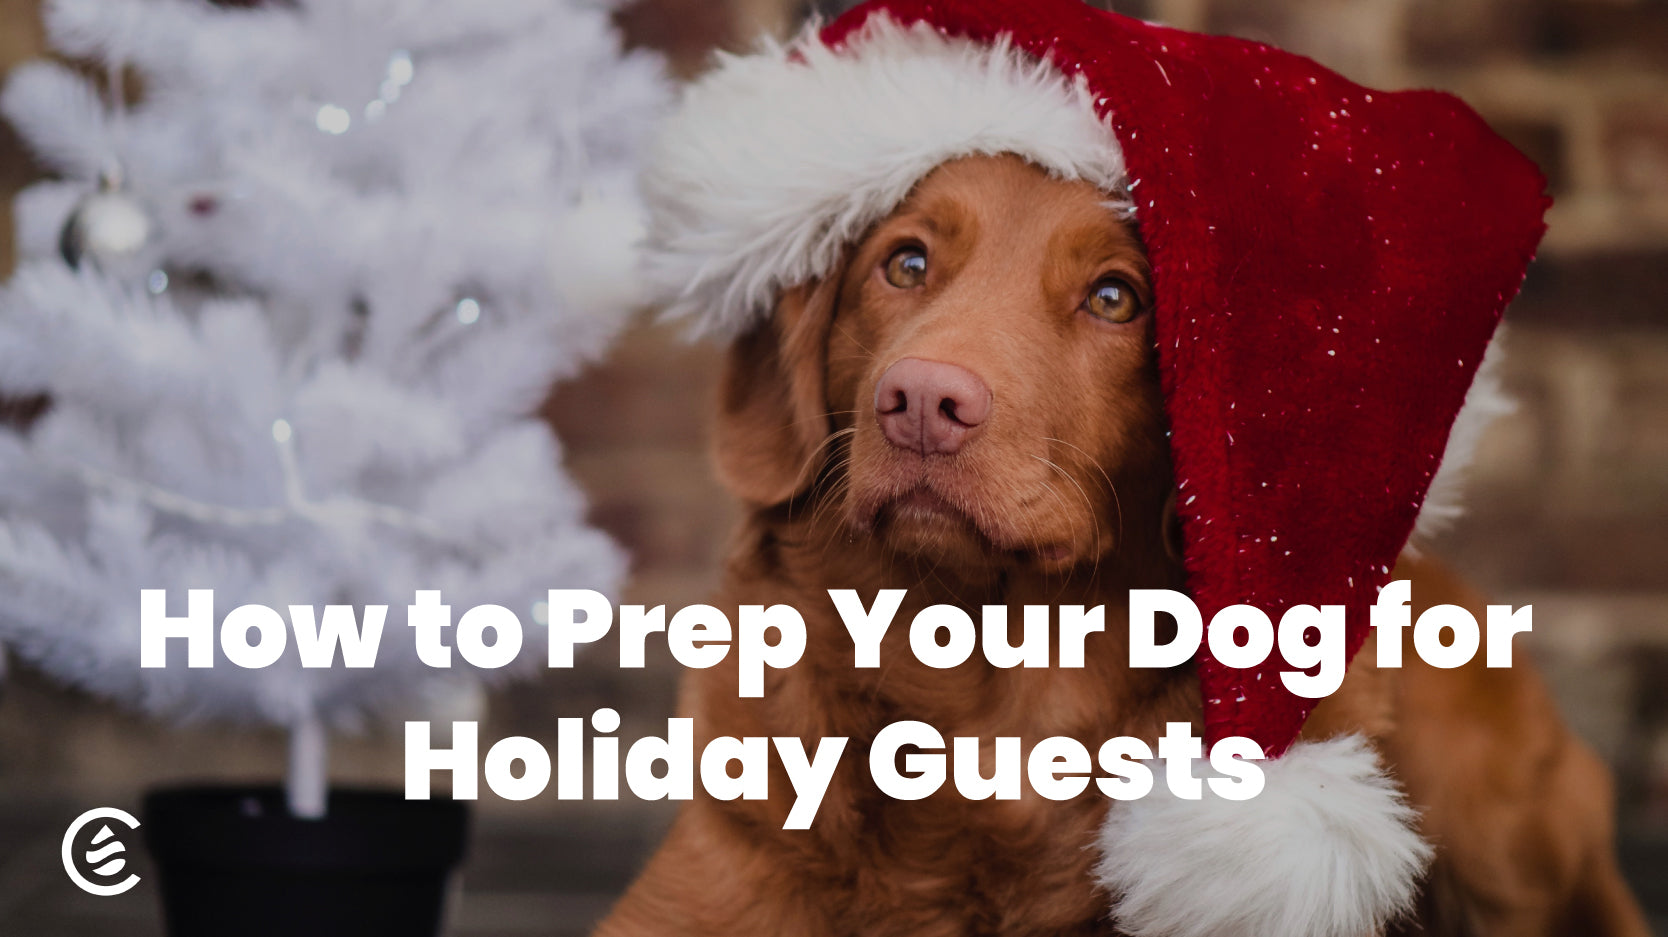 Cedarcide Blog Post Image, How to Prep Your Dog for Holiday Guests